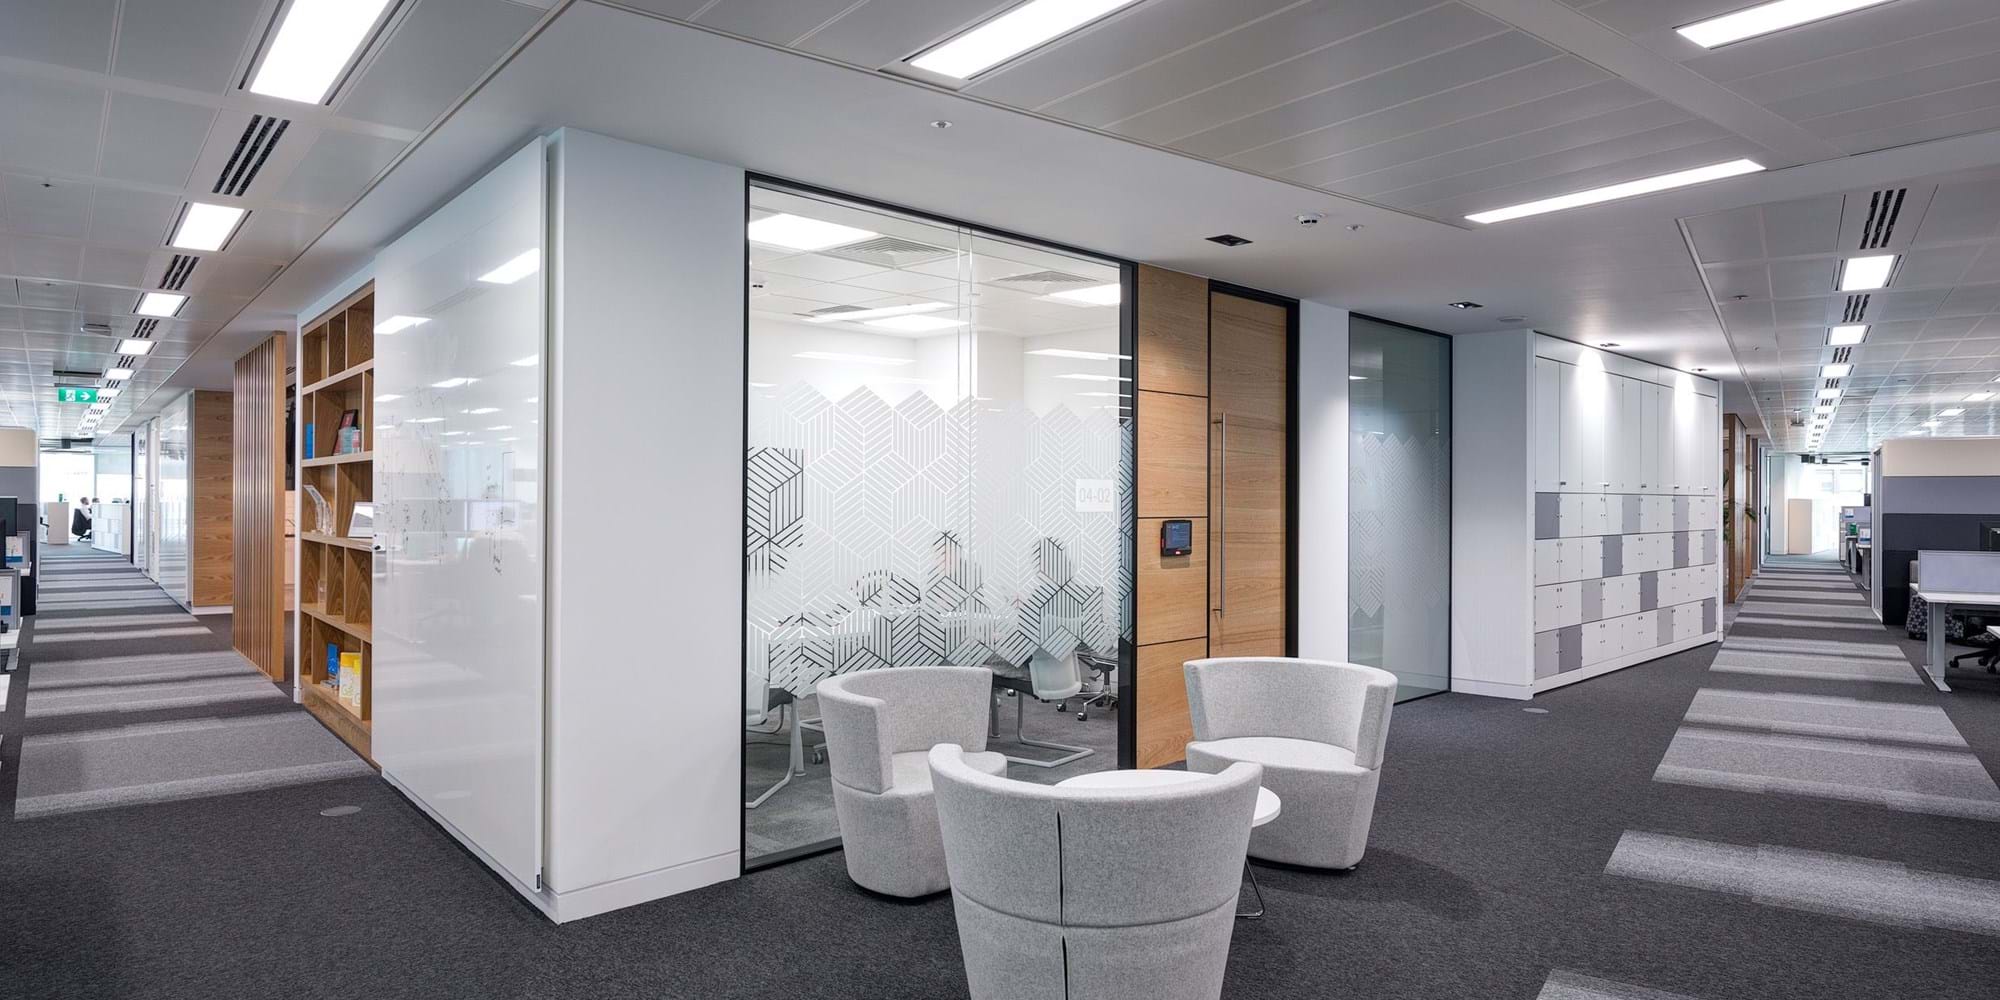 Modus Workspace office design, fit out and refurbishment - Atkins - Victoria, London - Atkins 09 highres sRGB.jpg